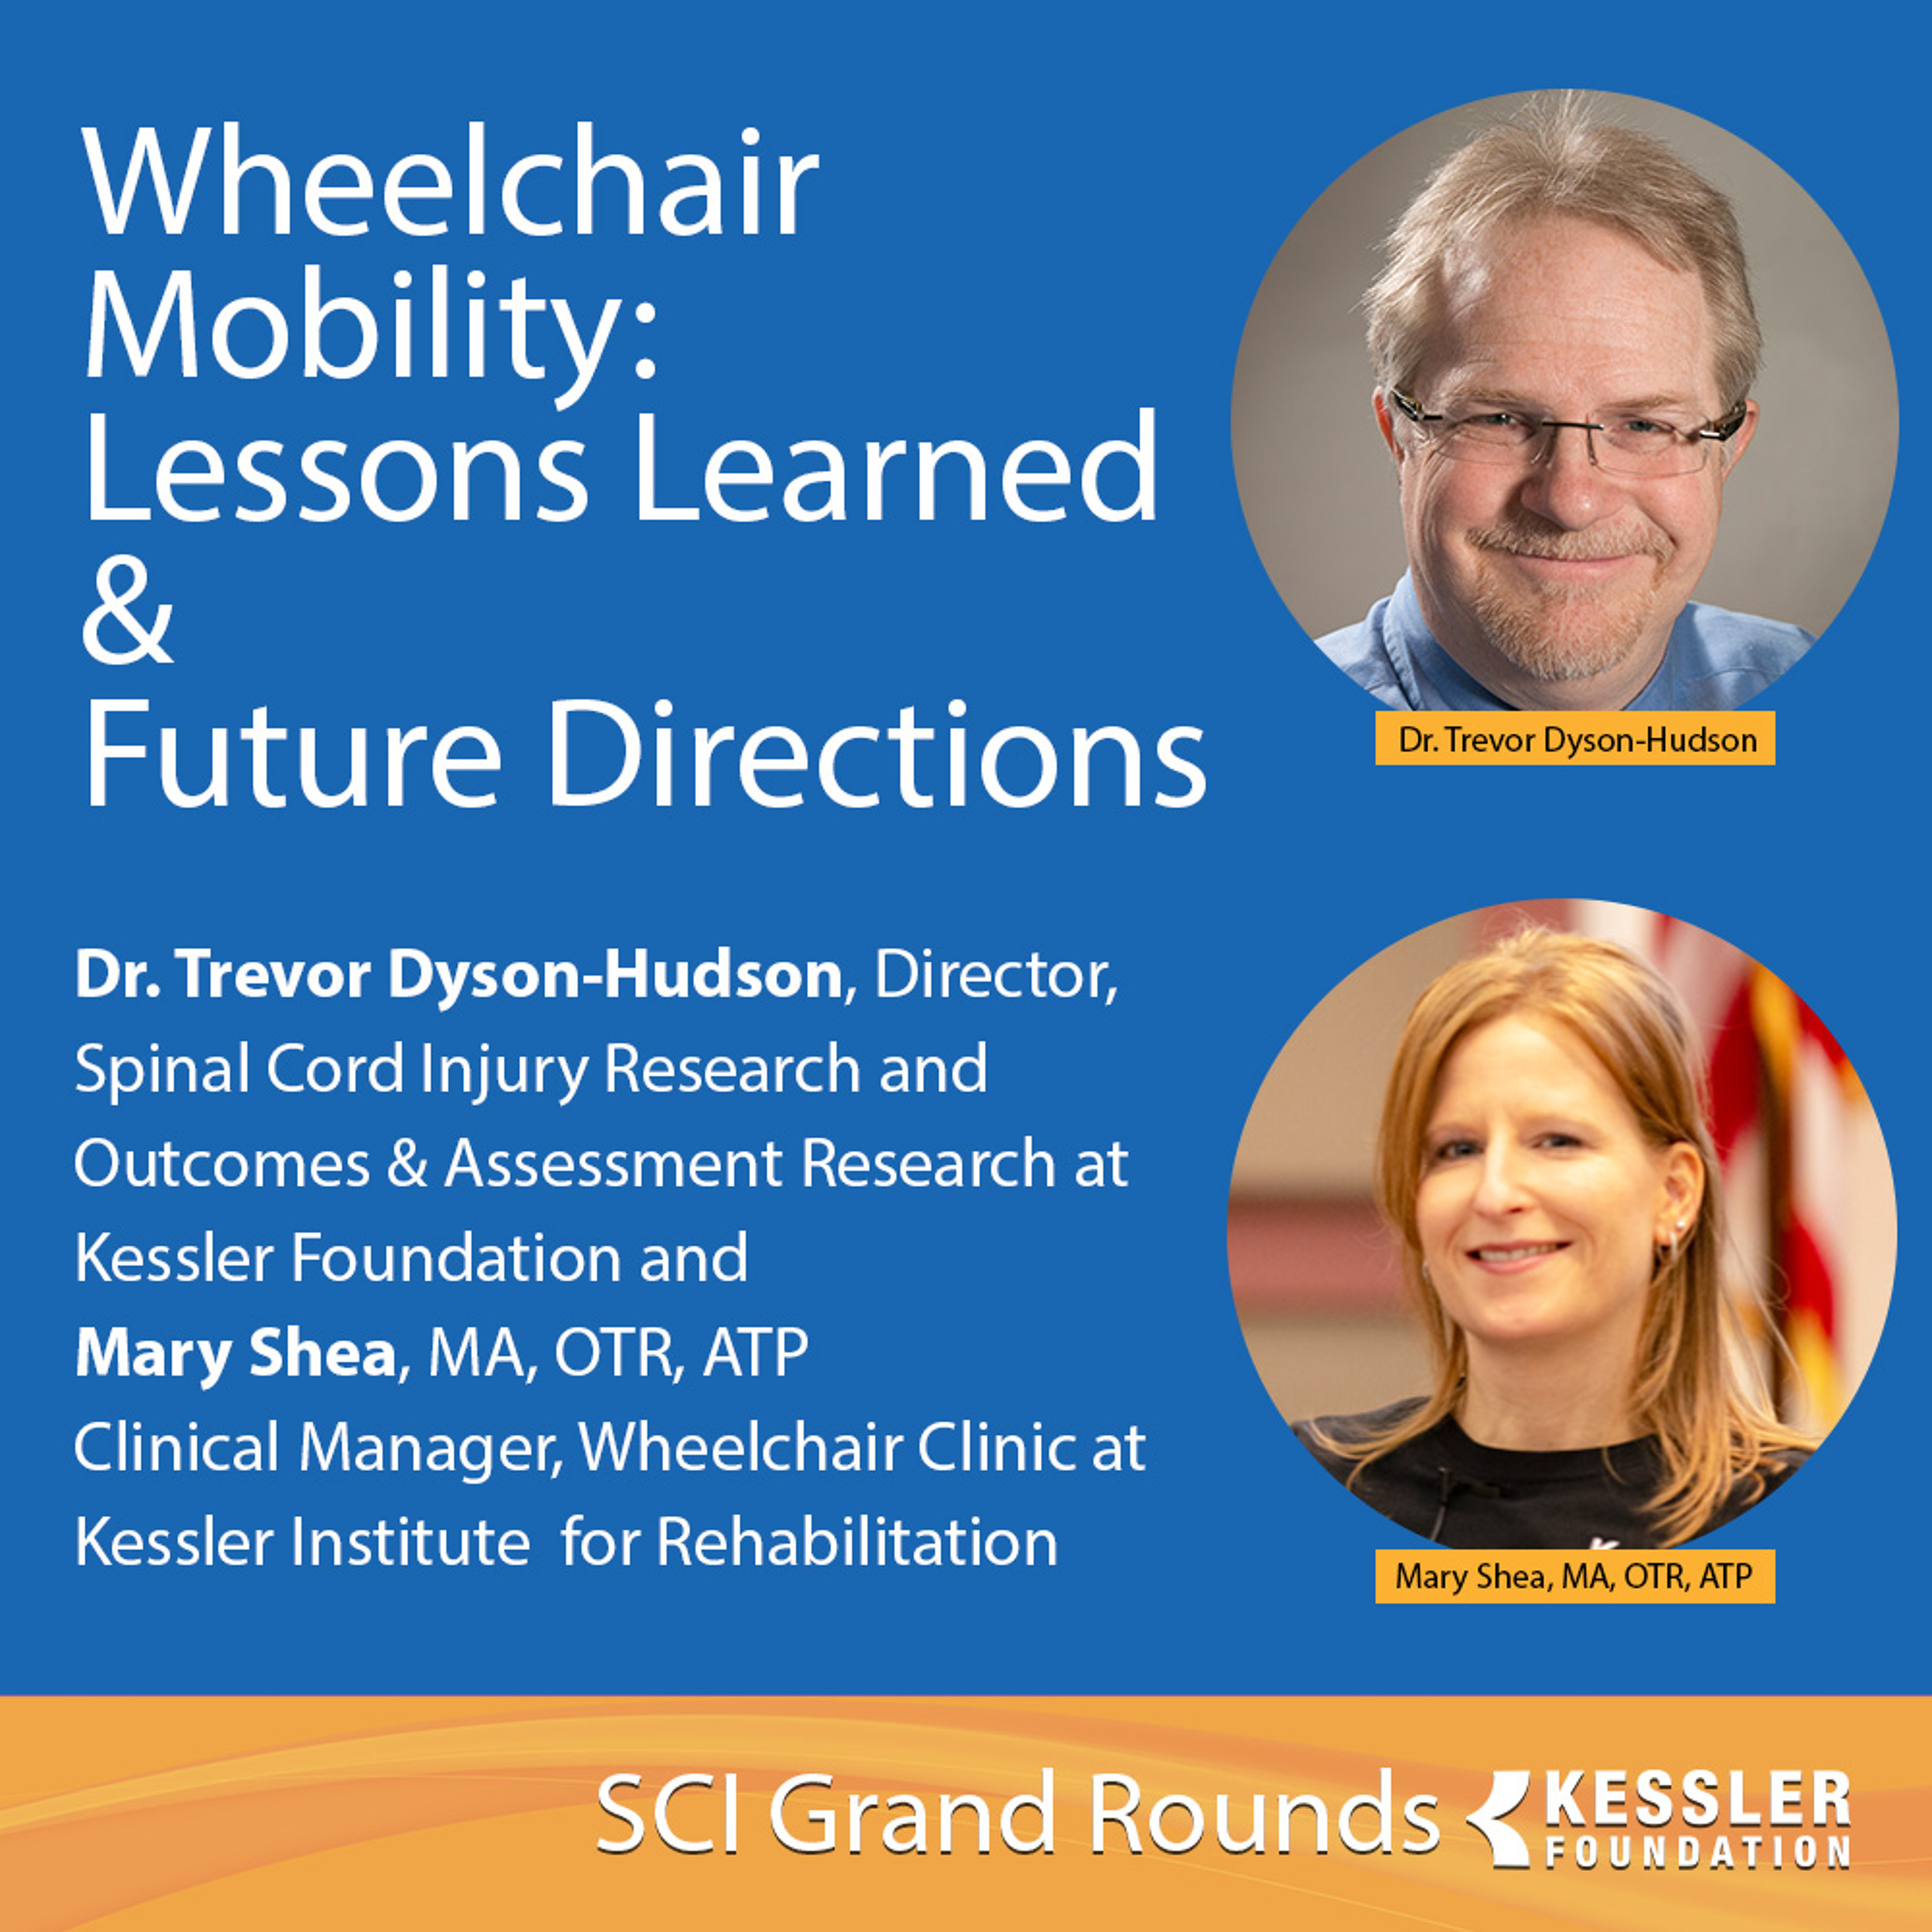 08NOV18-SCI Grand Rounds: Wheelchair Mobility: Lessons Learned & Future Directions